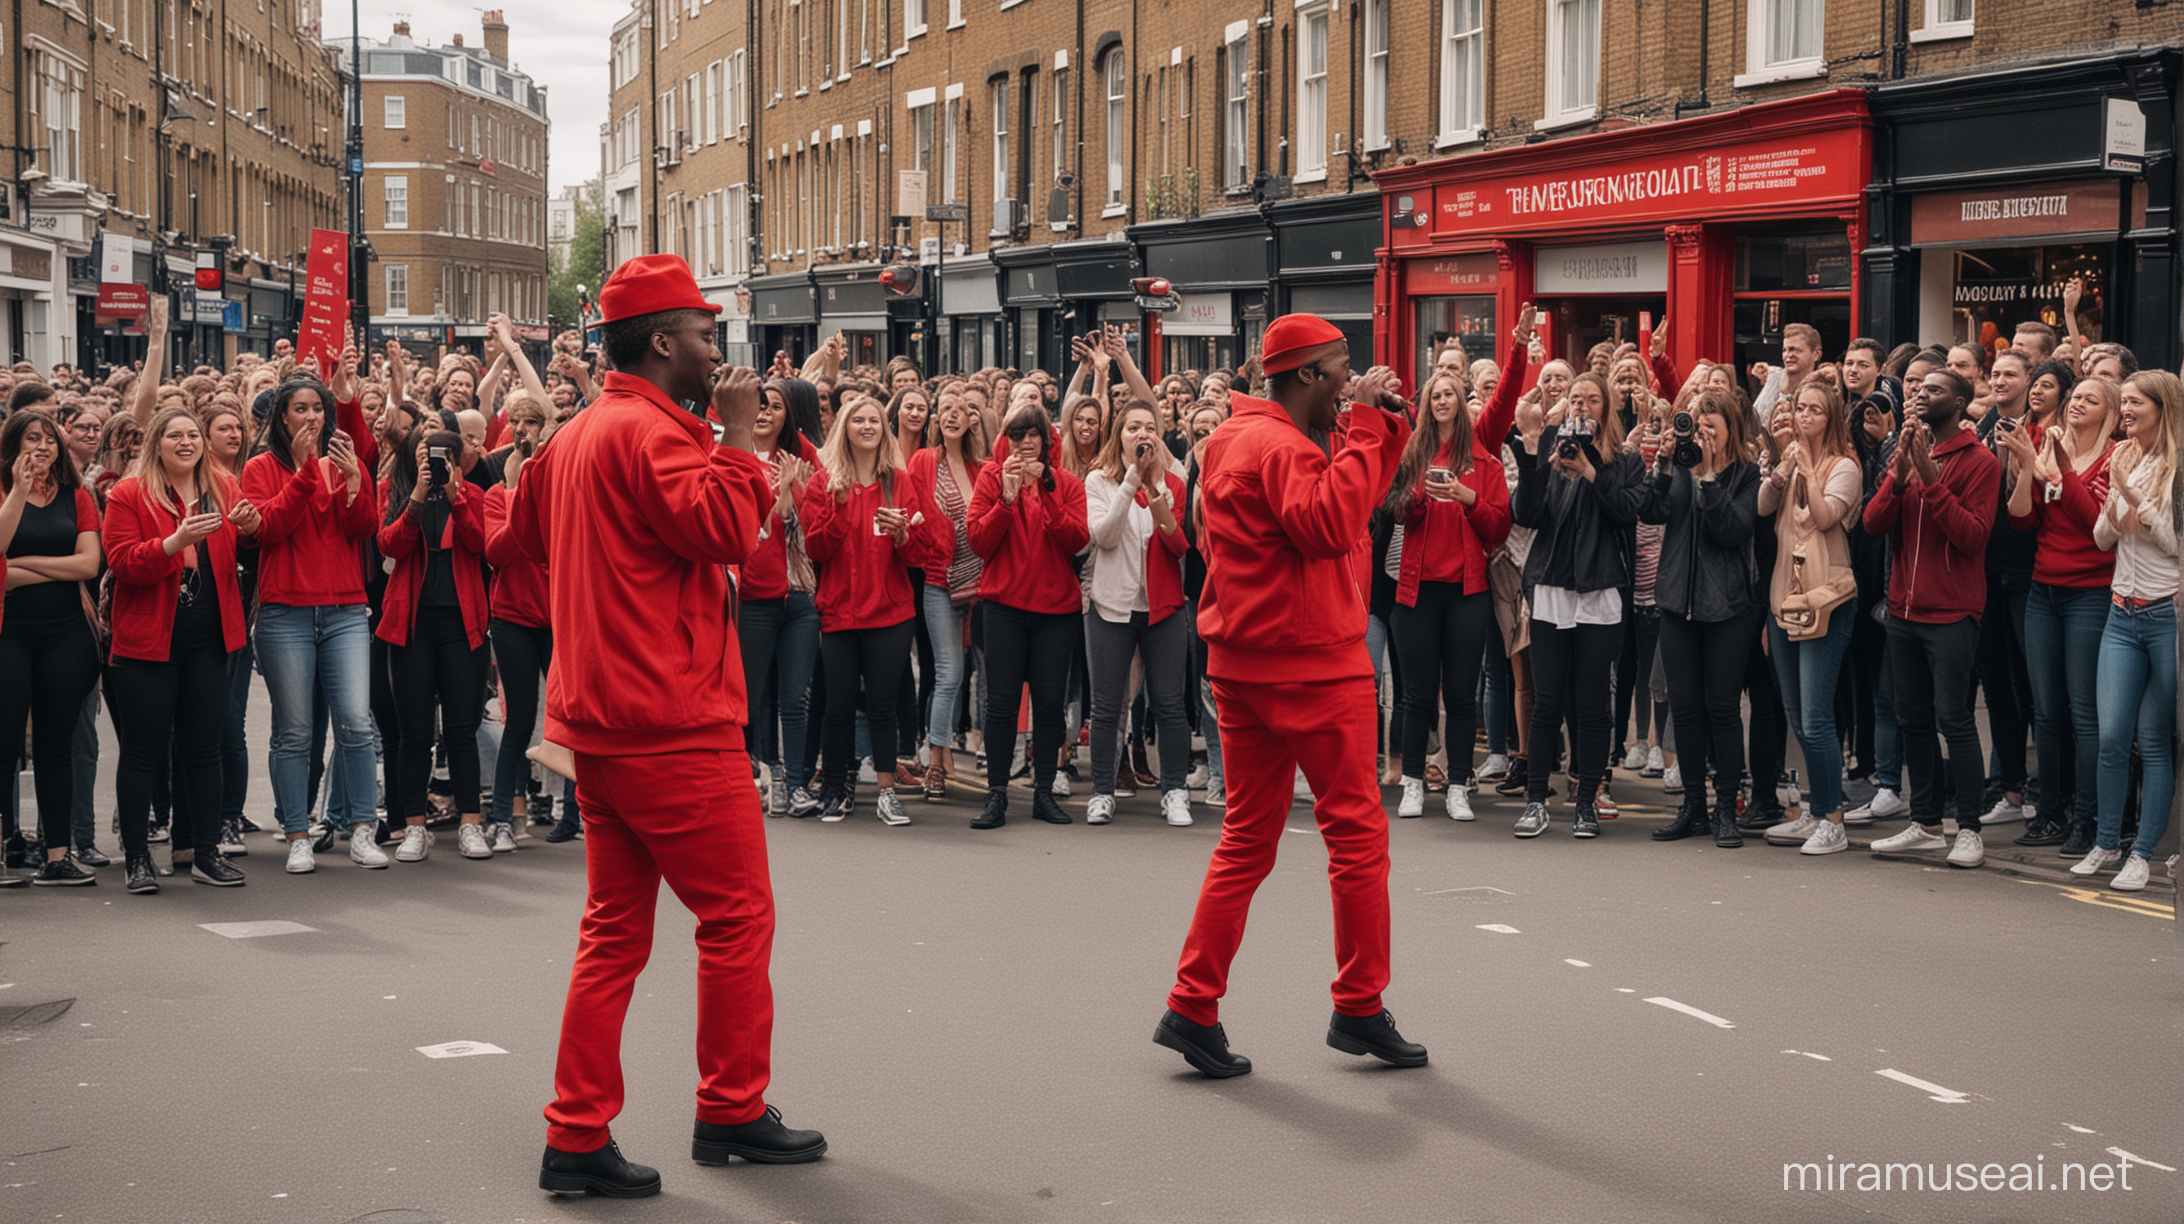 show me realistic  street in London where you see a queue of people dancing to a DJ dressed in red that has a big speaker and it's playing for  the people in the queue